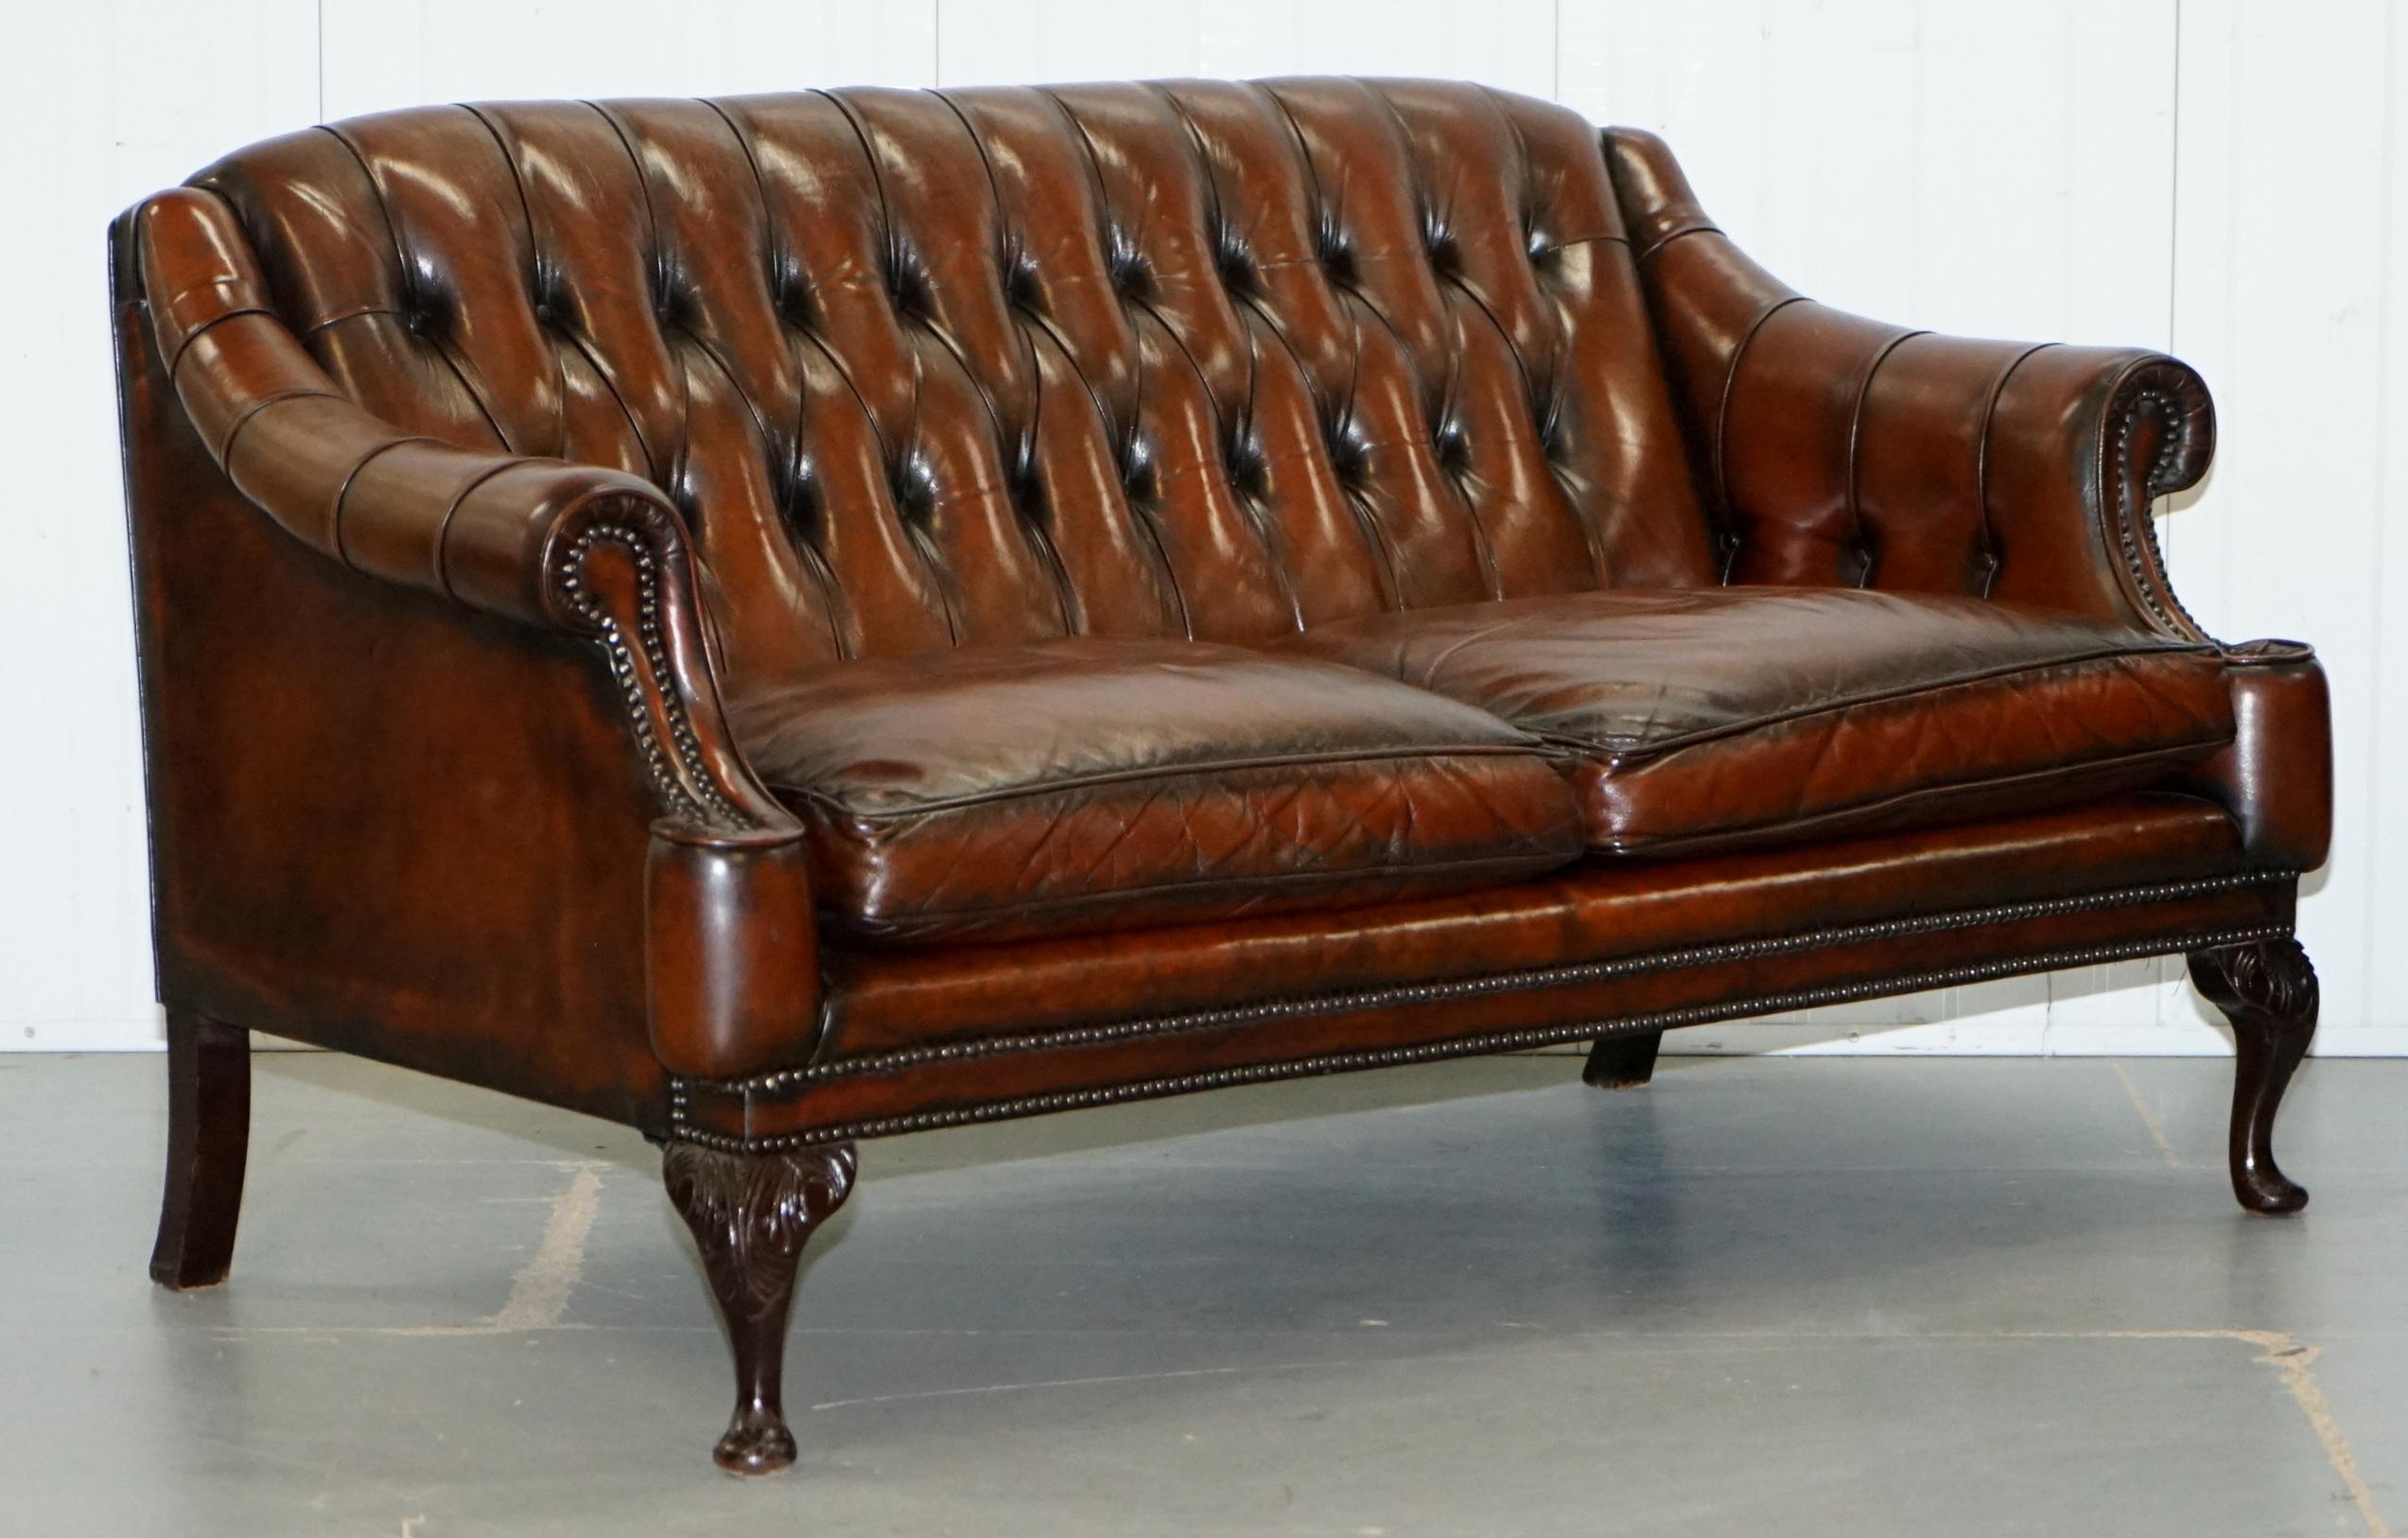 We are delighted to offer for salethis stunning pair of very rare mid-century Lutyen’s Viceroy style Chesterfield hand dyed cigar brown leather sofas with soft feather filled cushions

A very rare model suite, originally made by Lutyen’s in the